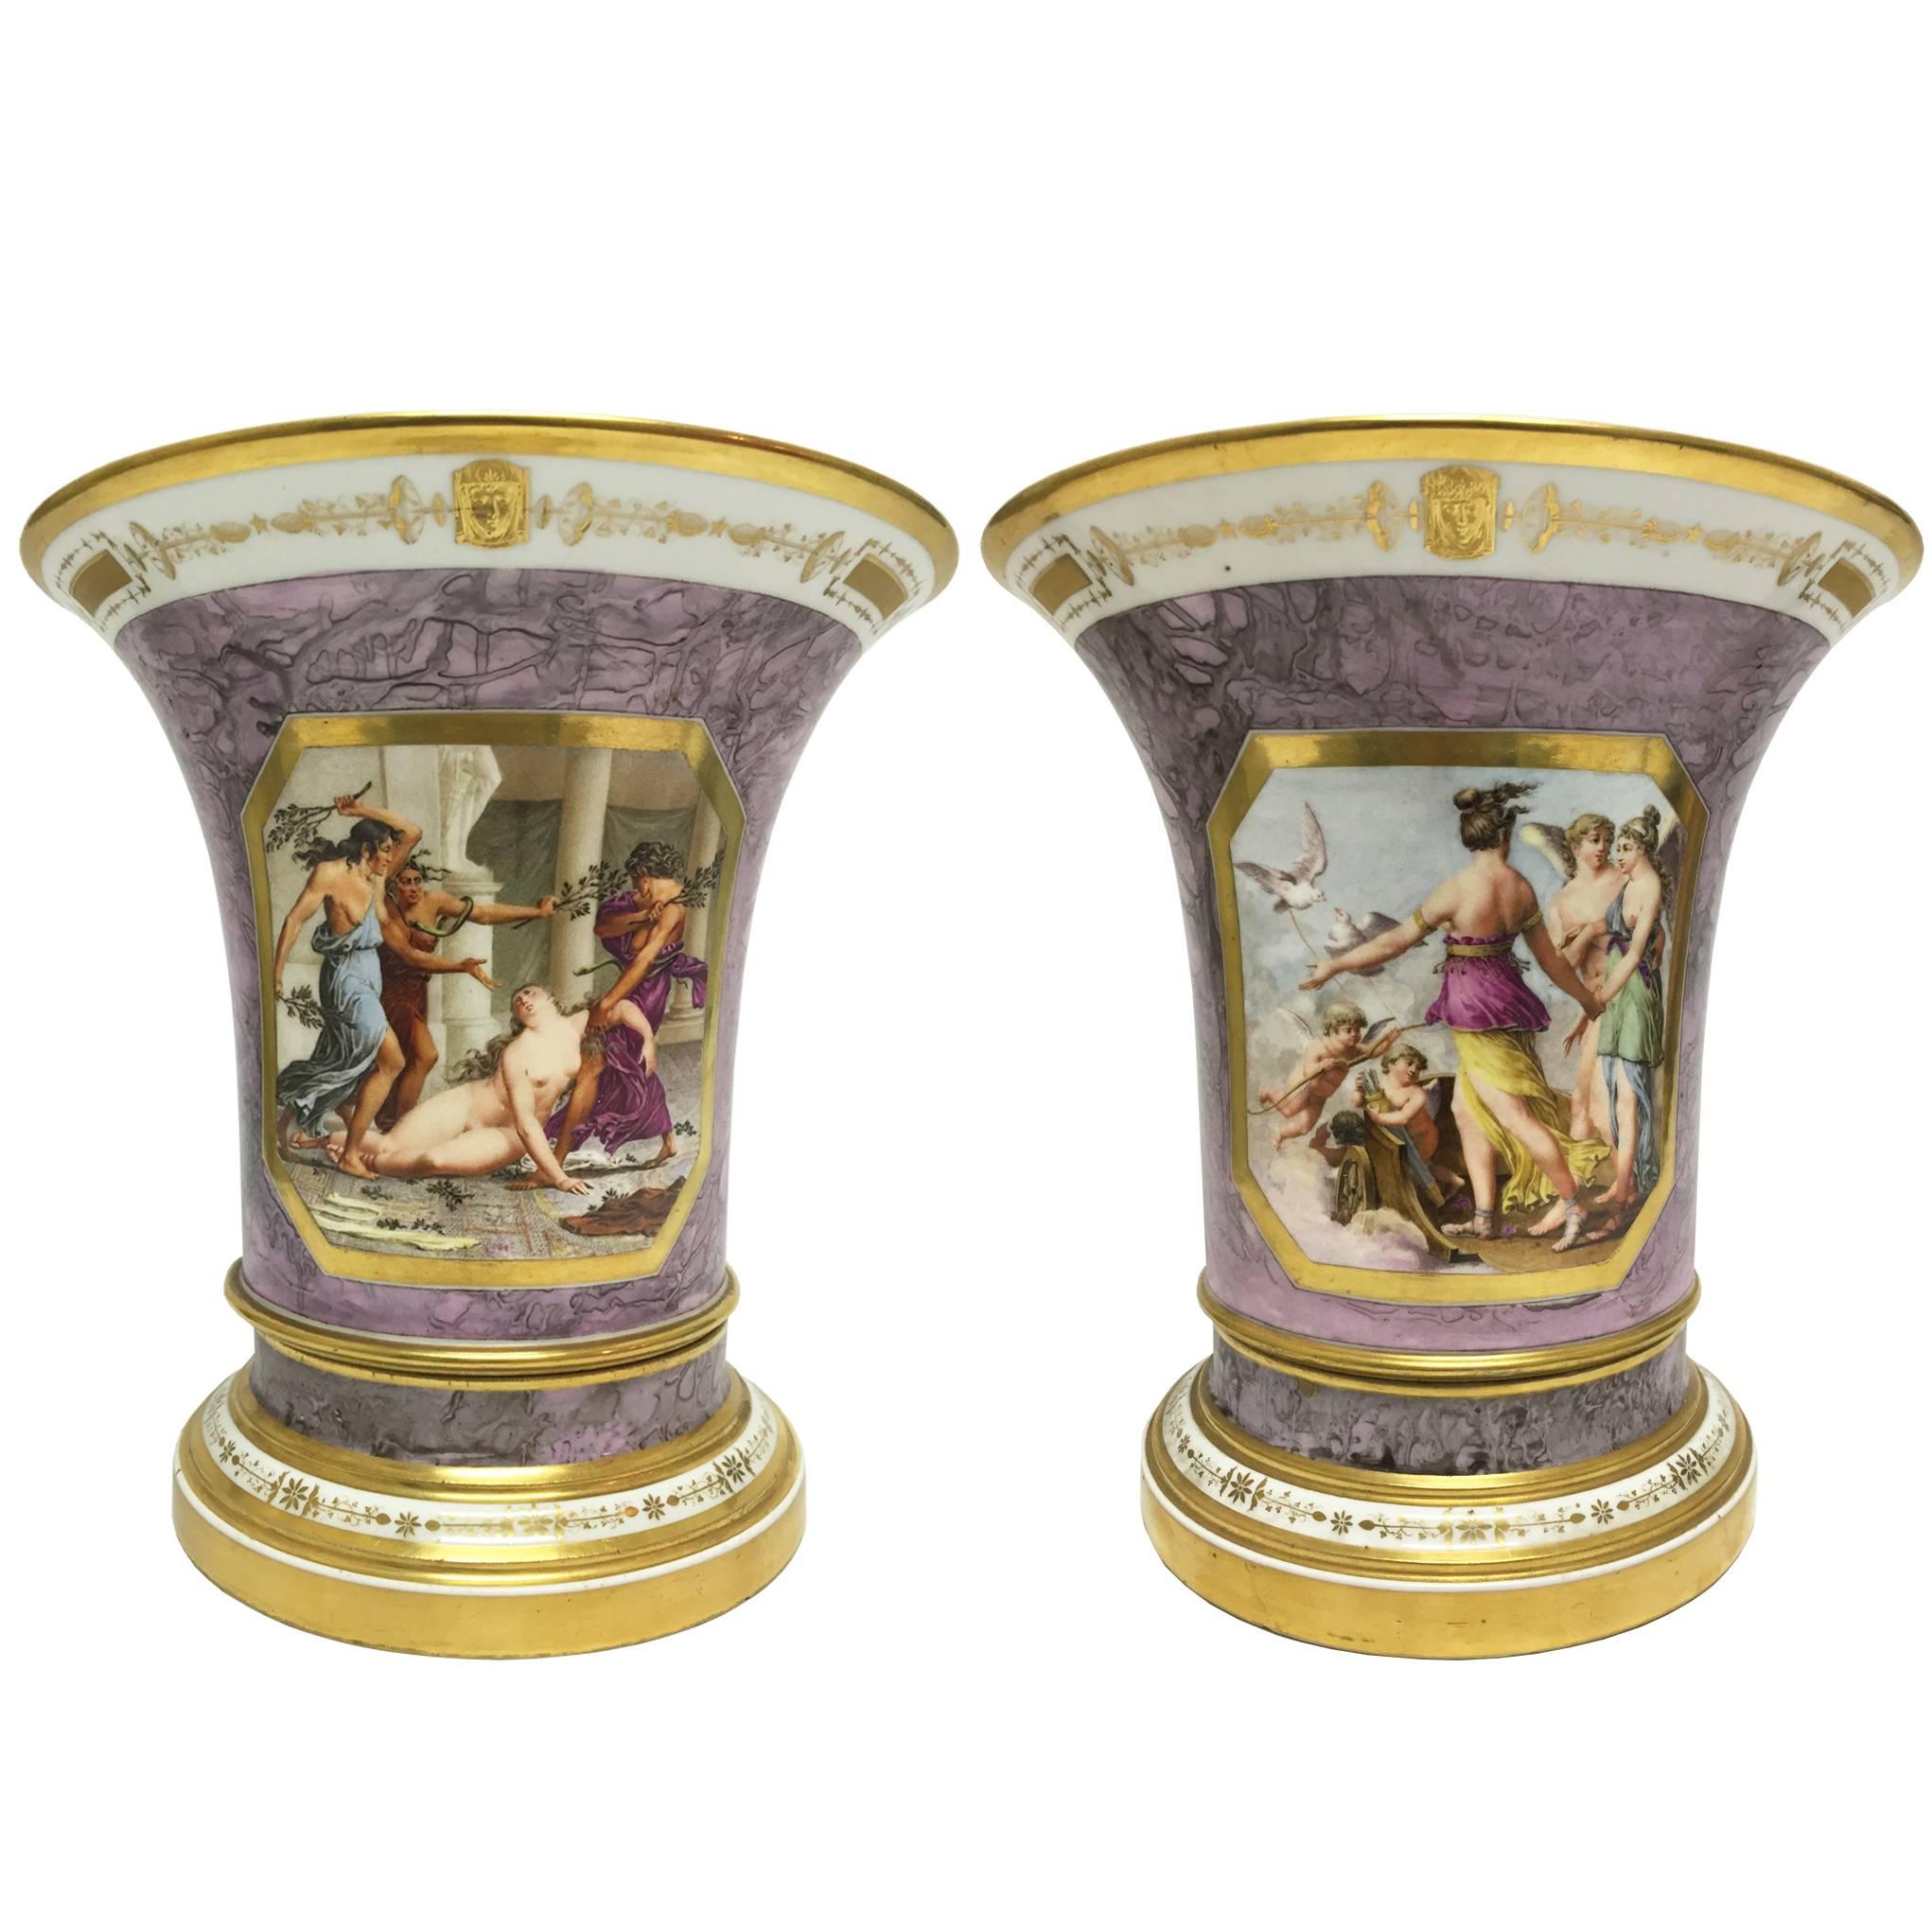 Period Vienna Porcelain Cachepots of the Highest Quality Early 19th Century For Sale